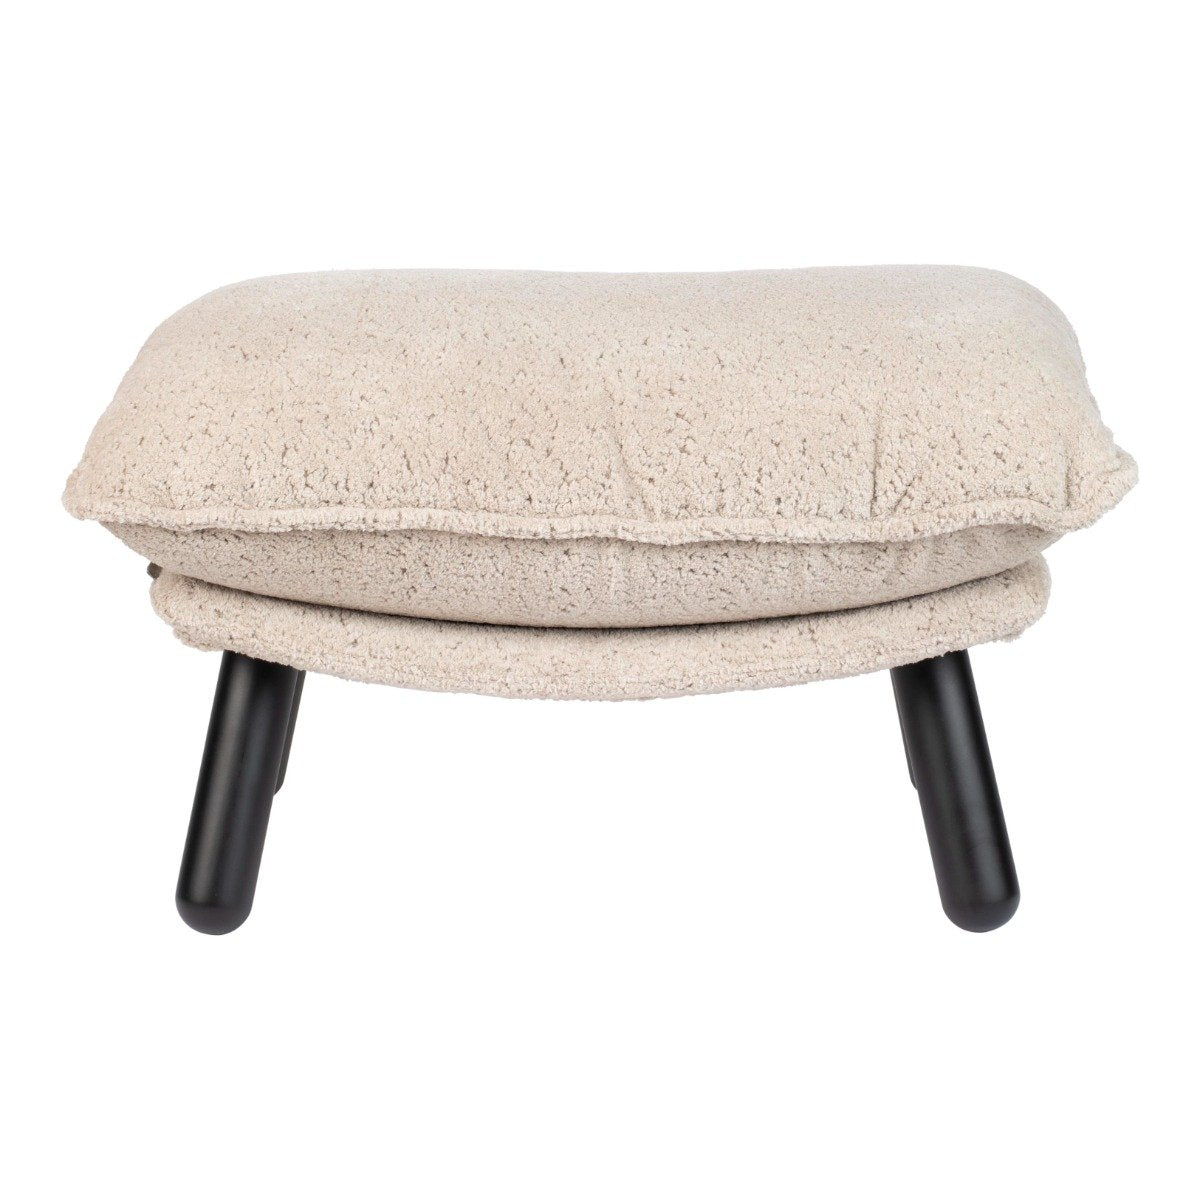 Footstool LAZY SACK cotton teddy, Zuiver, Eye on Design